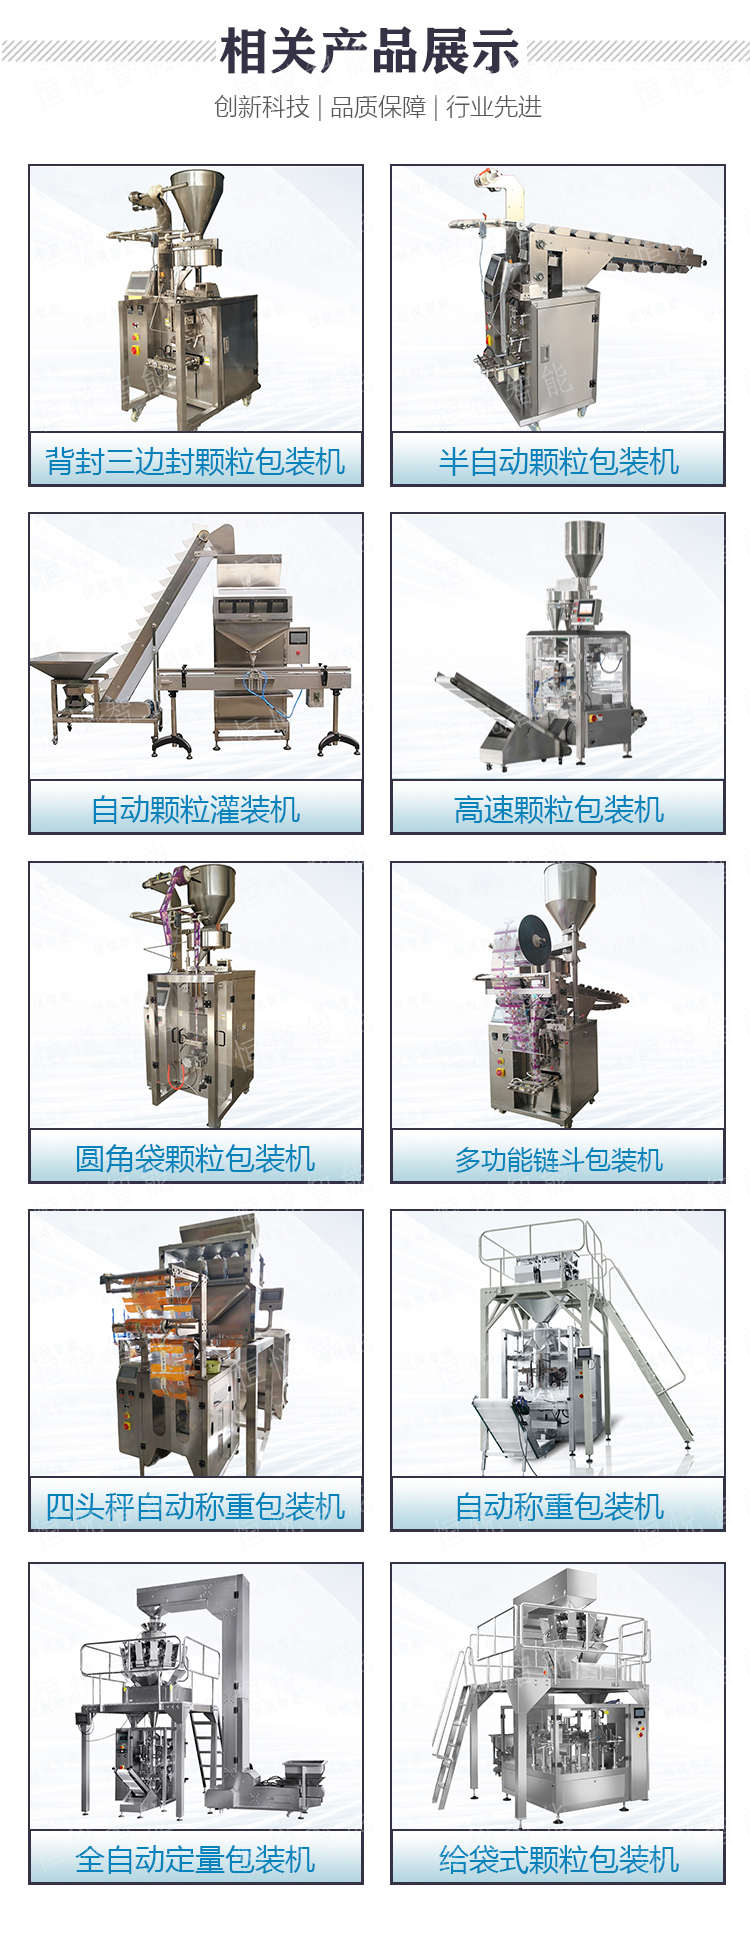 Fully automatic particle packaging machine, food particle quantitative weighing and packaging machine, bagged peanuts, melon seeds, nuts, fried goods